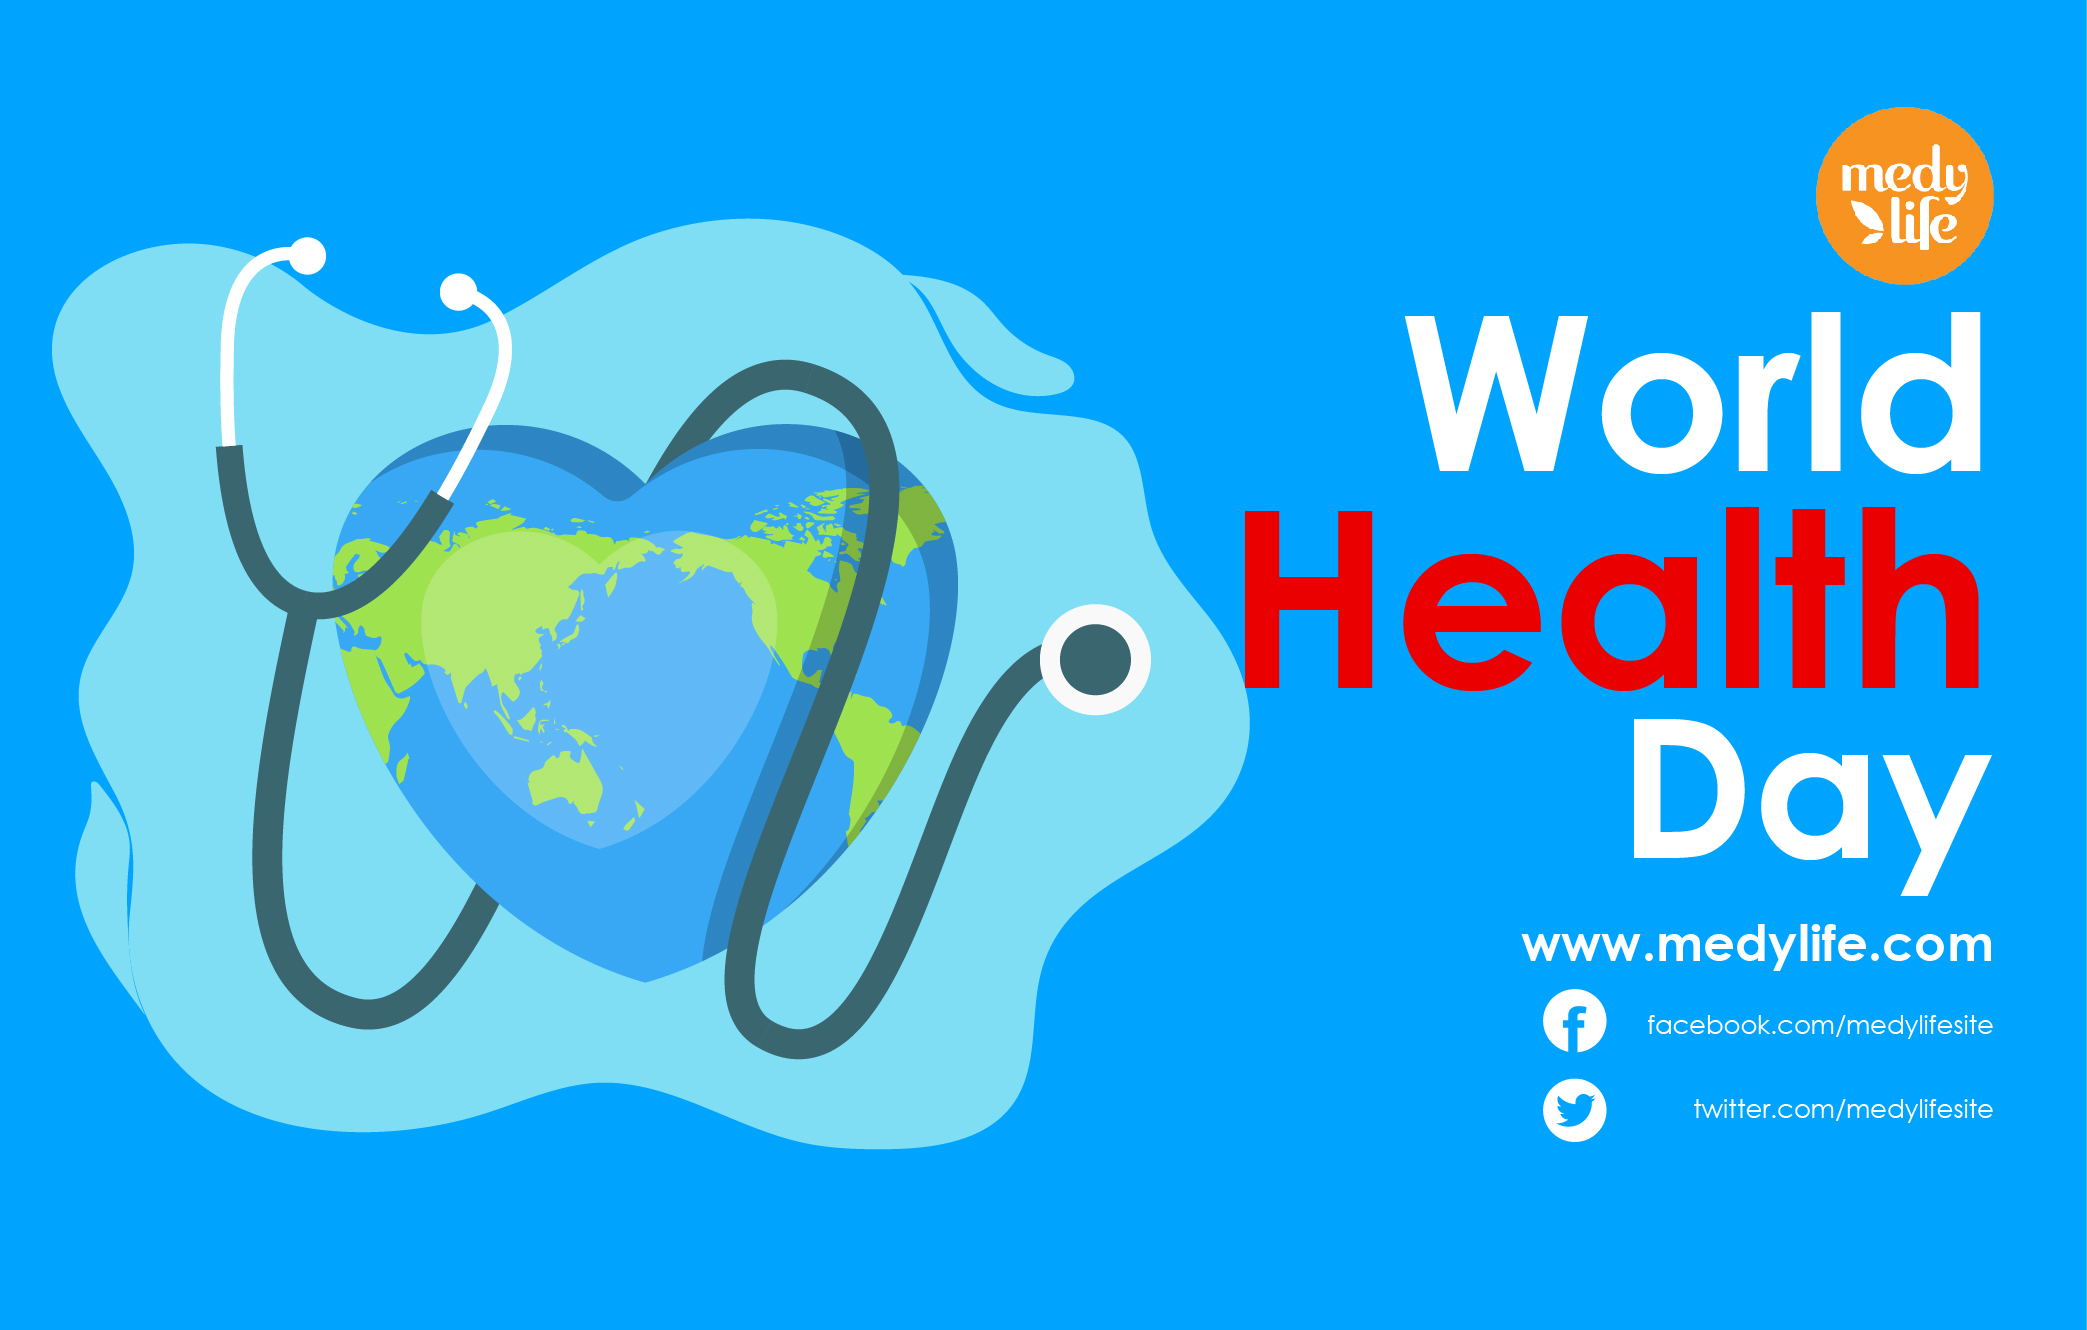 World Heart Day:An Initiative to Create Awareness about Heart Health